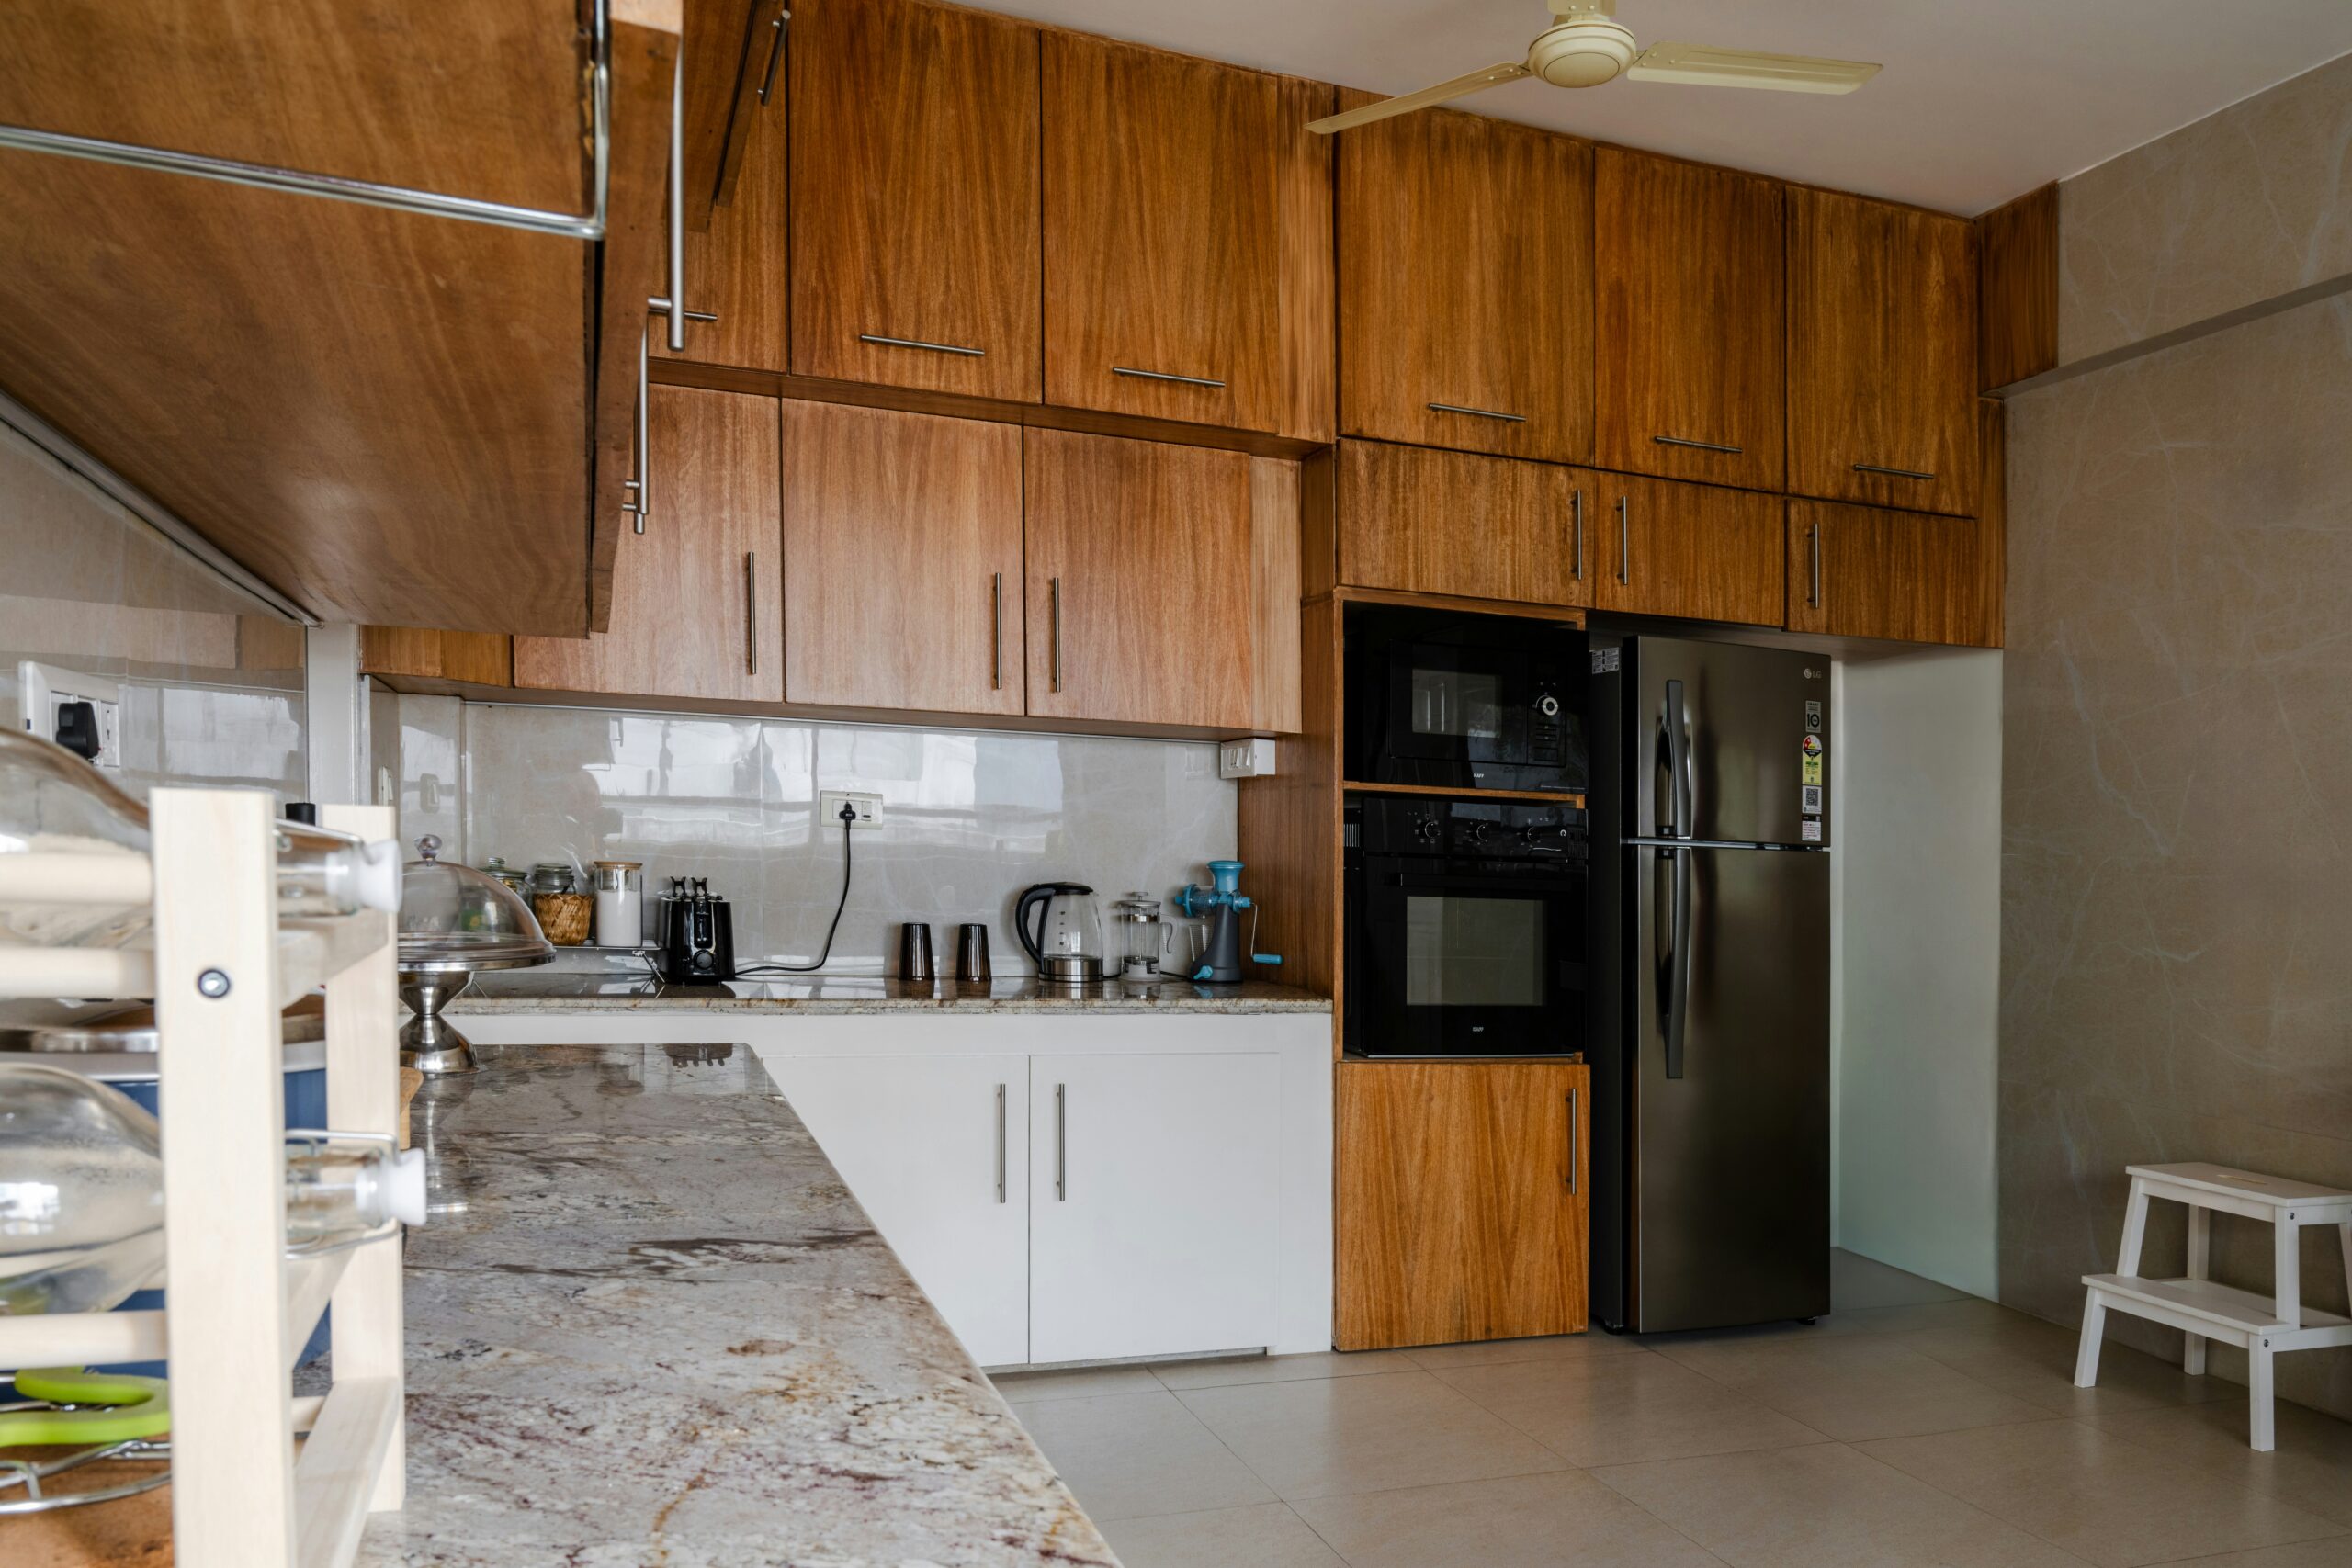  A Step-by-Step Guide to Staining Kitchen Cabinets by Maui Cabinet Refinishers